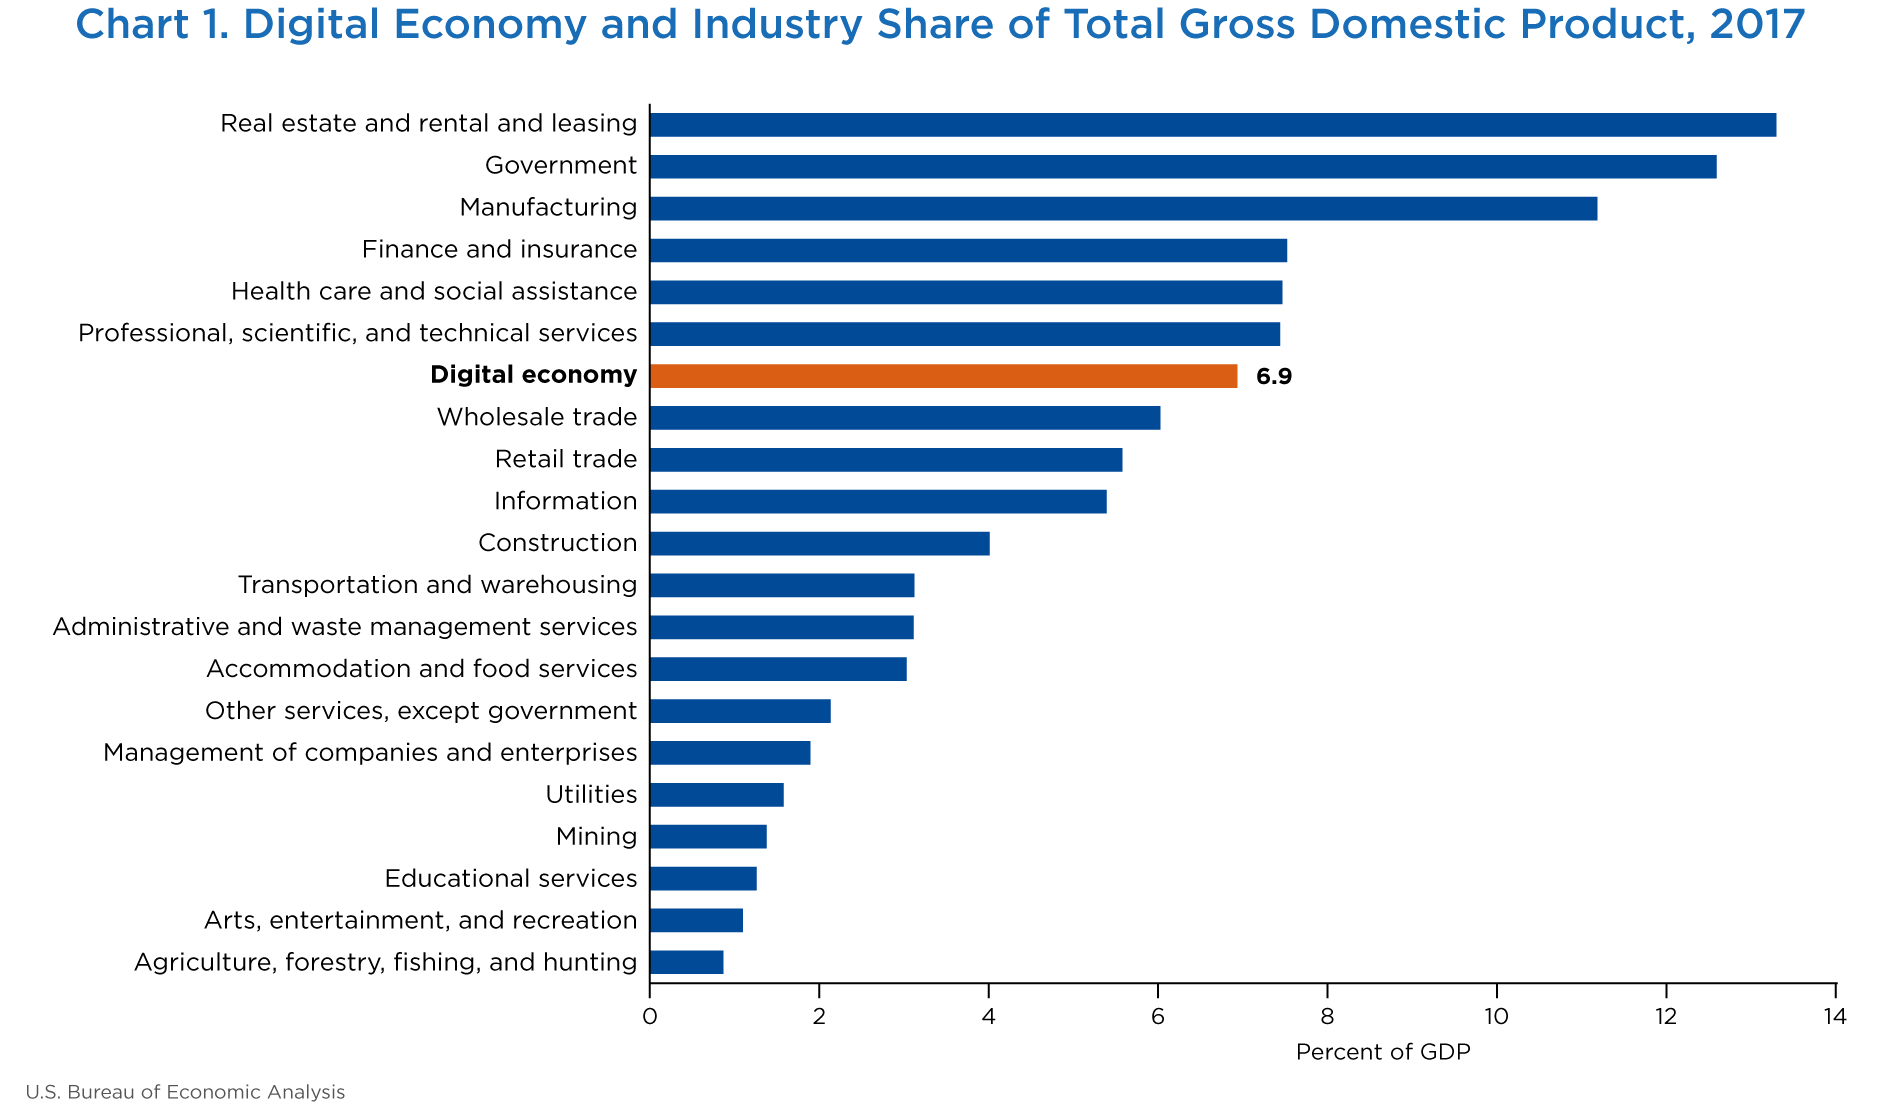 Chart 1. Digital Economy and Industry Share of Total Gross Domestic Product, 2017. Bar chart.